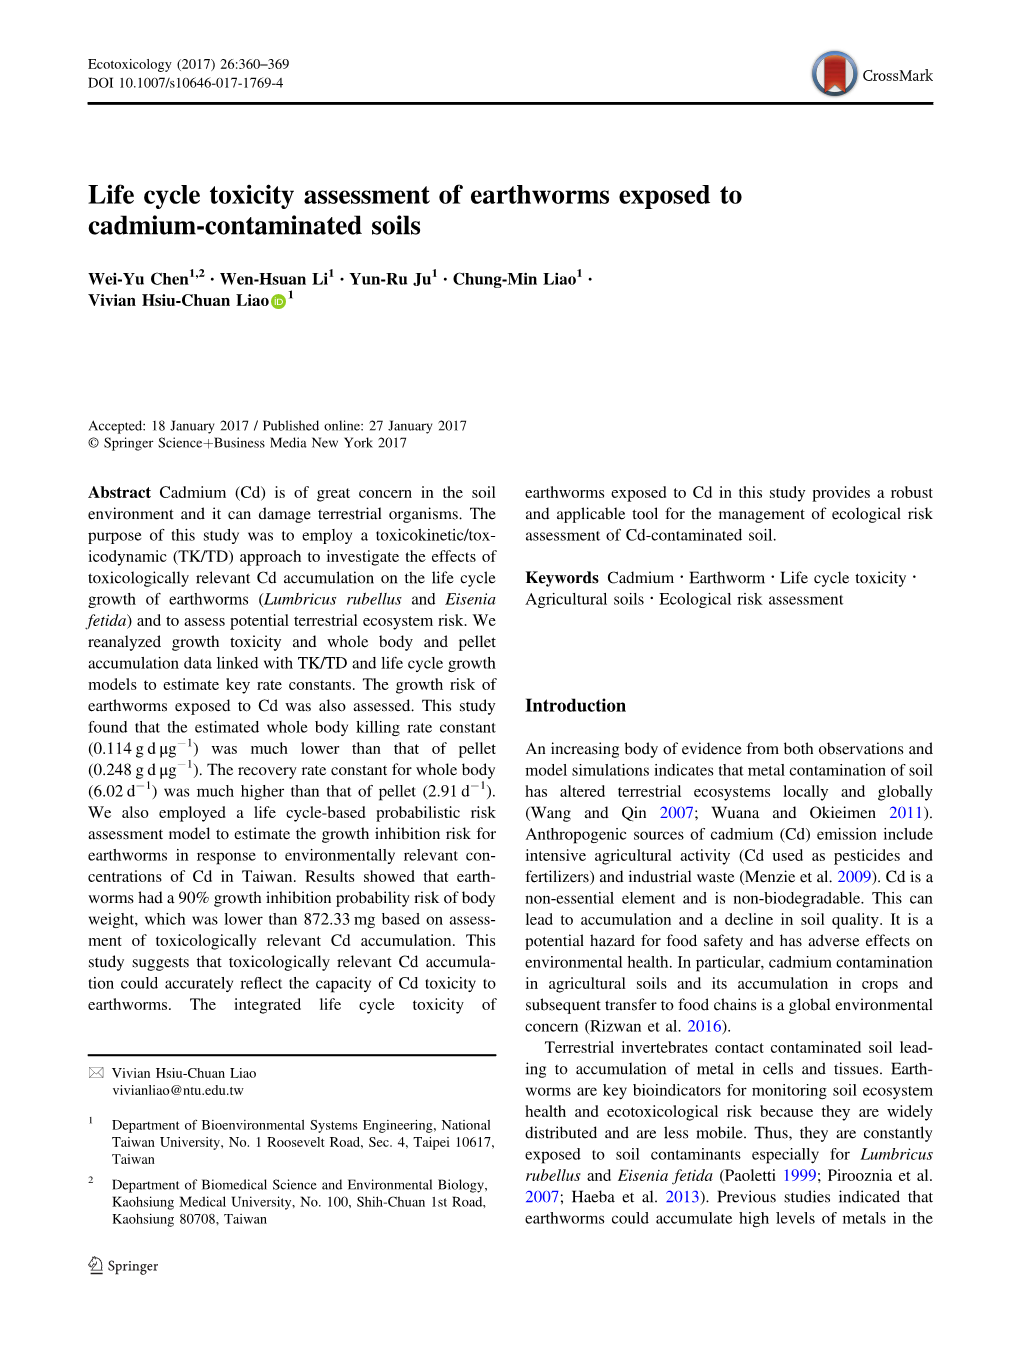 Life Cycle Toxicity Assessment of Earthworms Exposed to Cadmium-Contaminated Soils